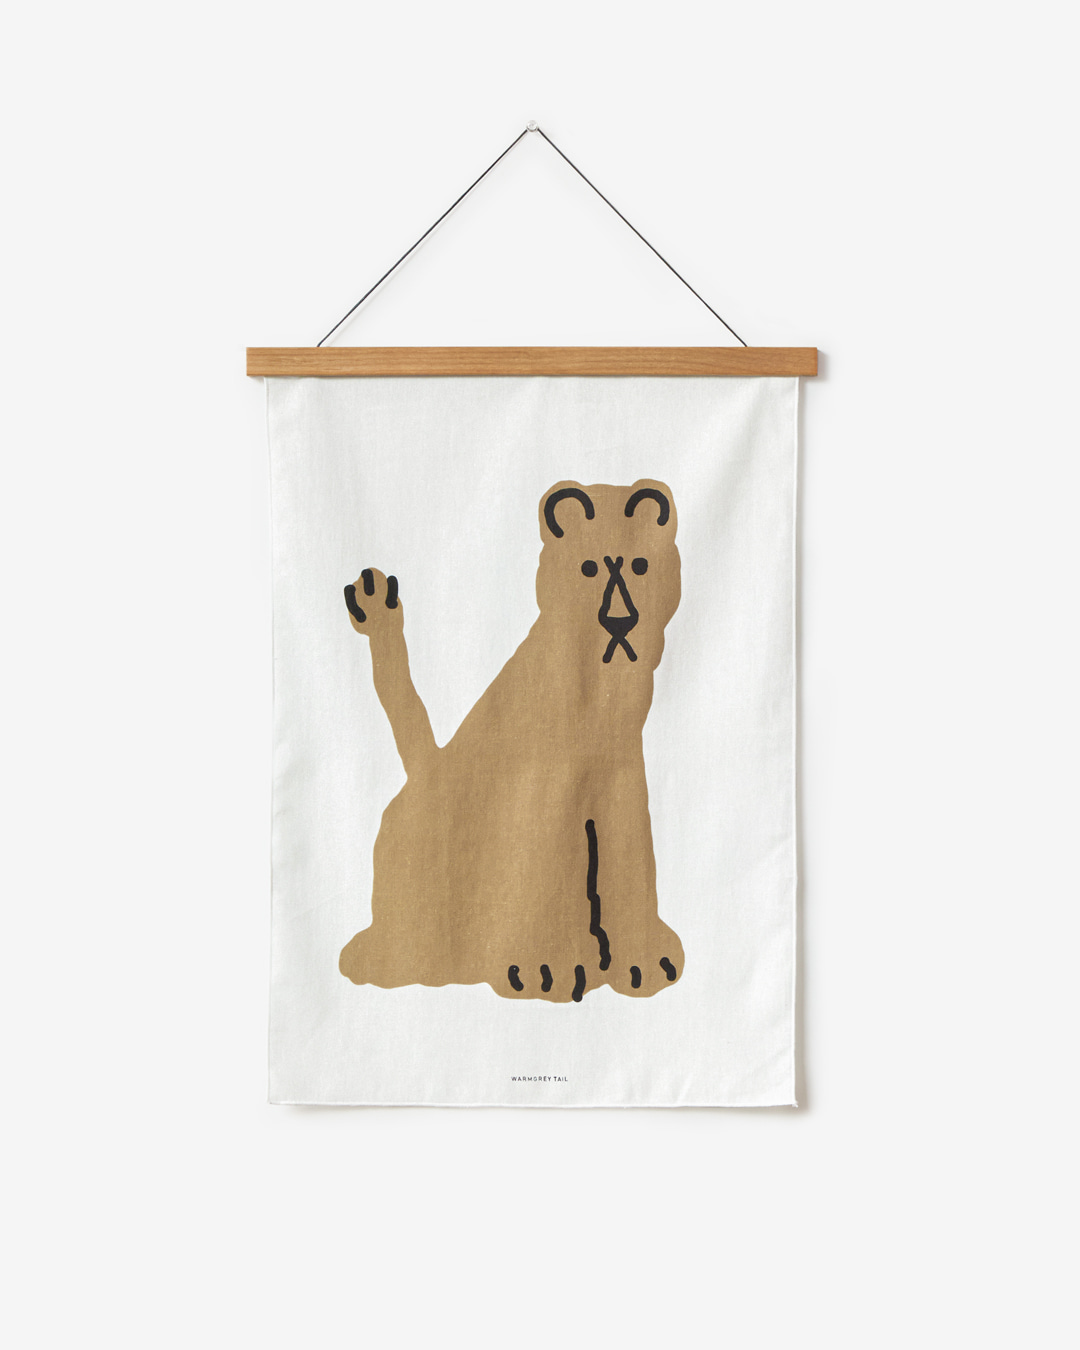 LIONESS SMALL FABRIC